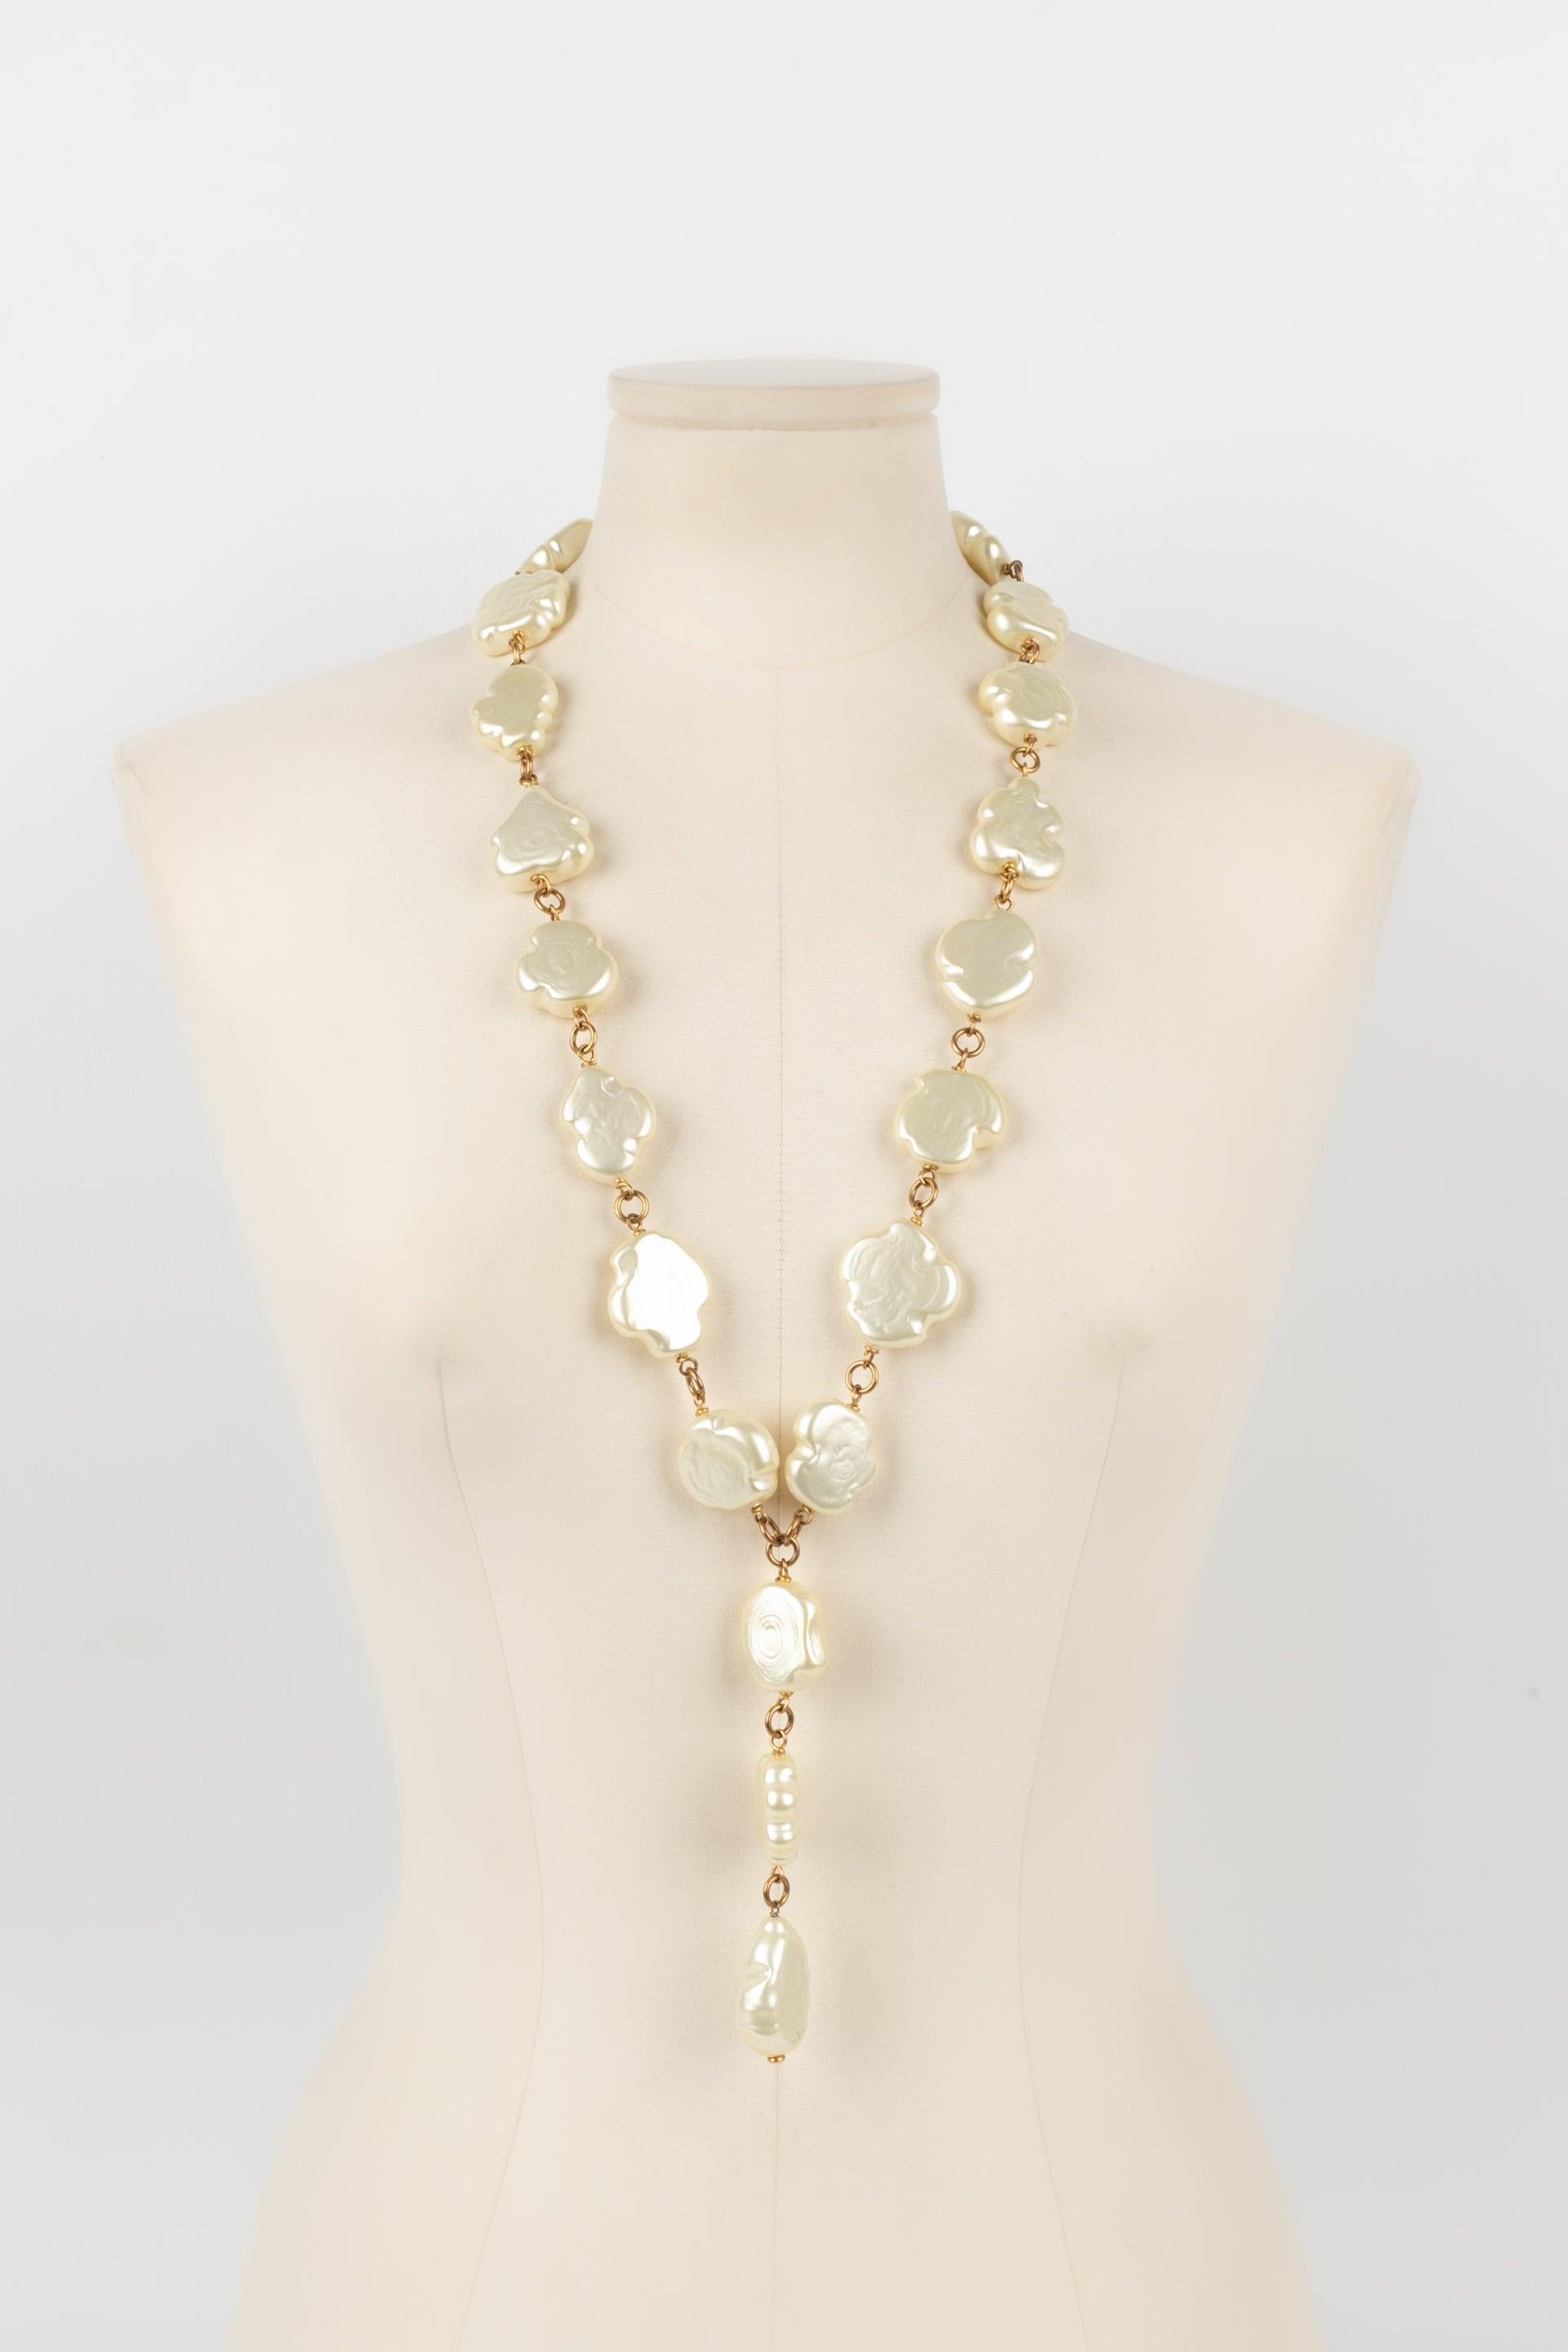 Chanel - (Made in France) Costume pearl necklace with a baroque design. Jewelry from the middle of the 1980s.

Additional information:
Condition: Very good condition
Dimensions: Length: from 80 cm to 86 cm

Seller Reference: CB236